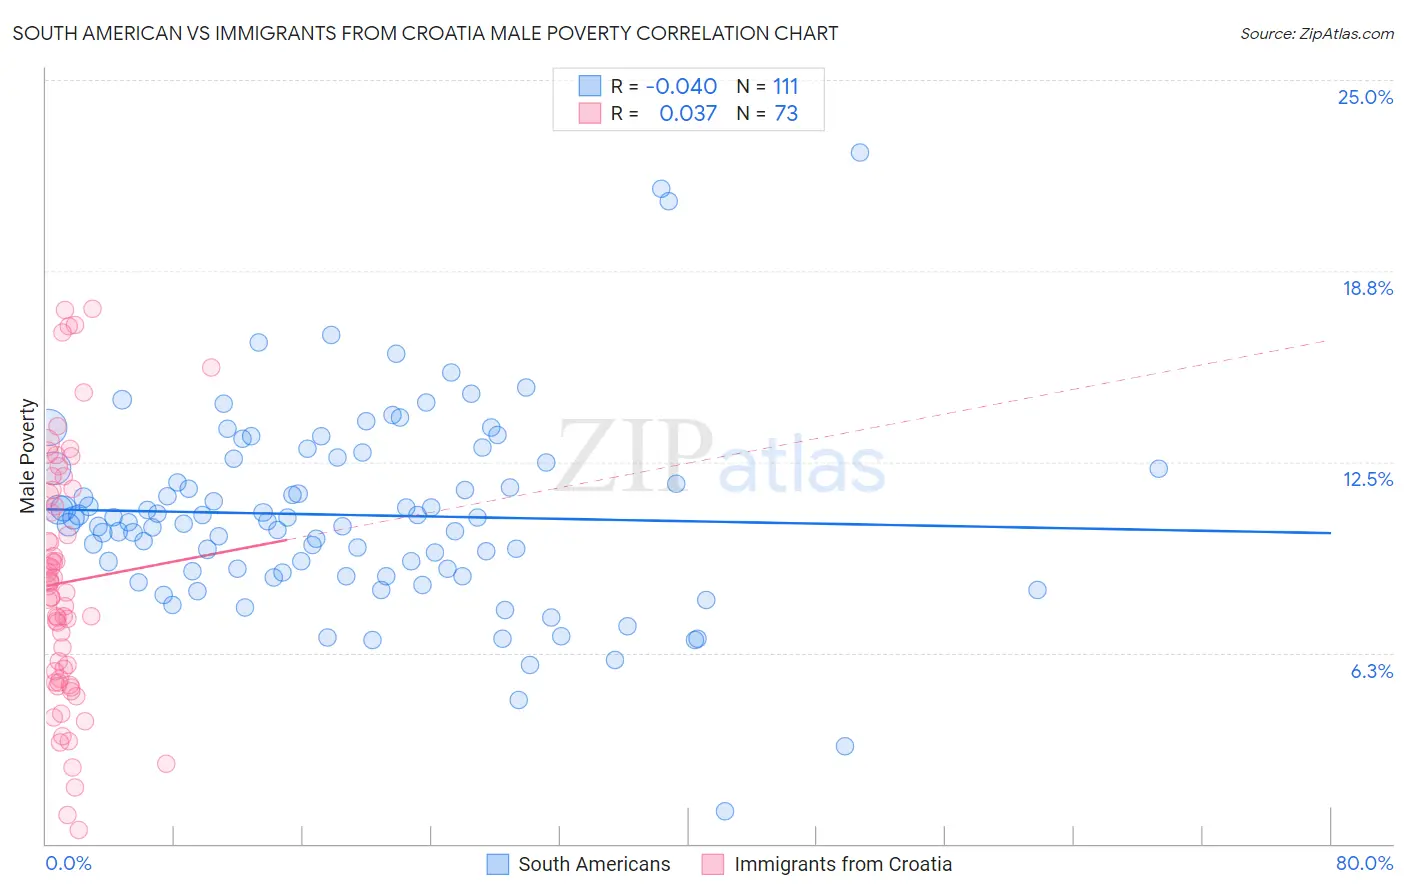 South American vs Immigrants from Croatia Male Poverty